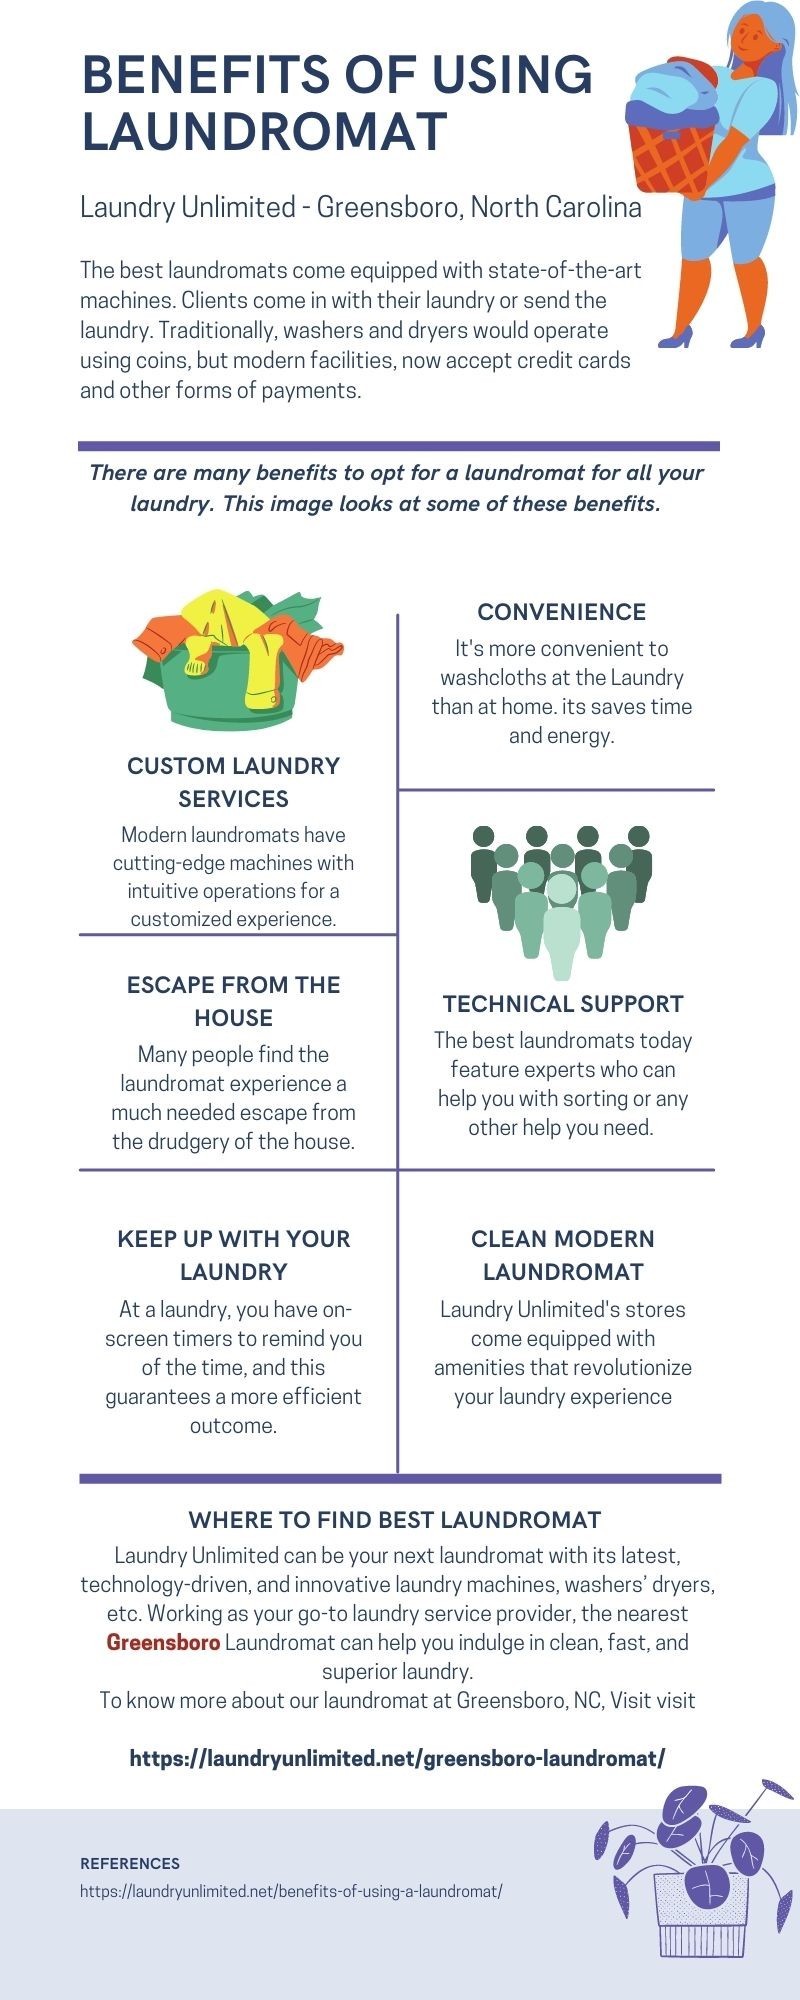 Benefits of using Professional Laundry Service - Laundry Unlimited 